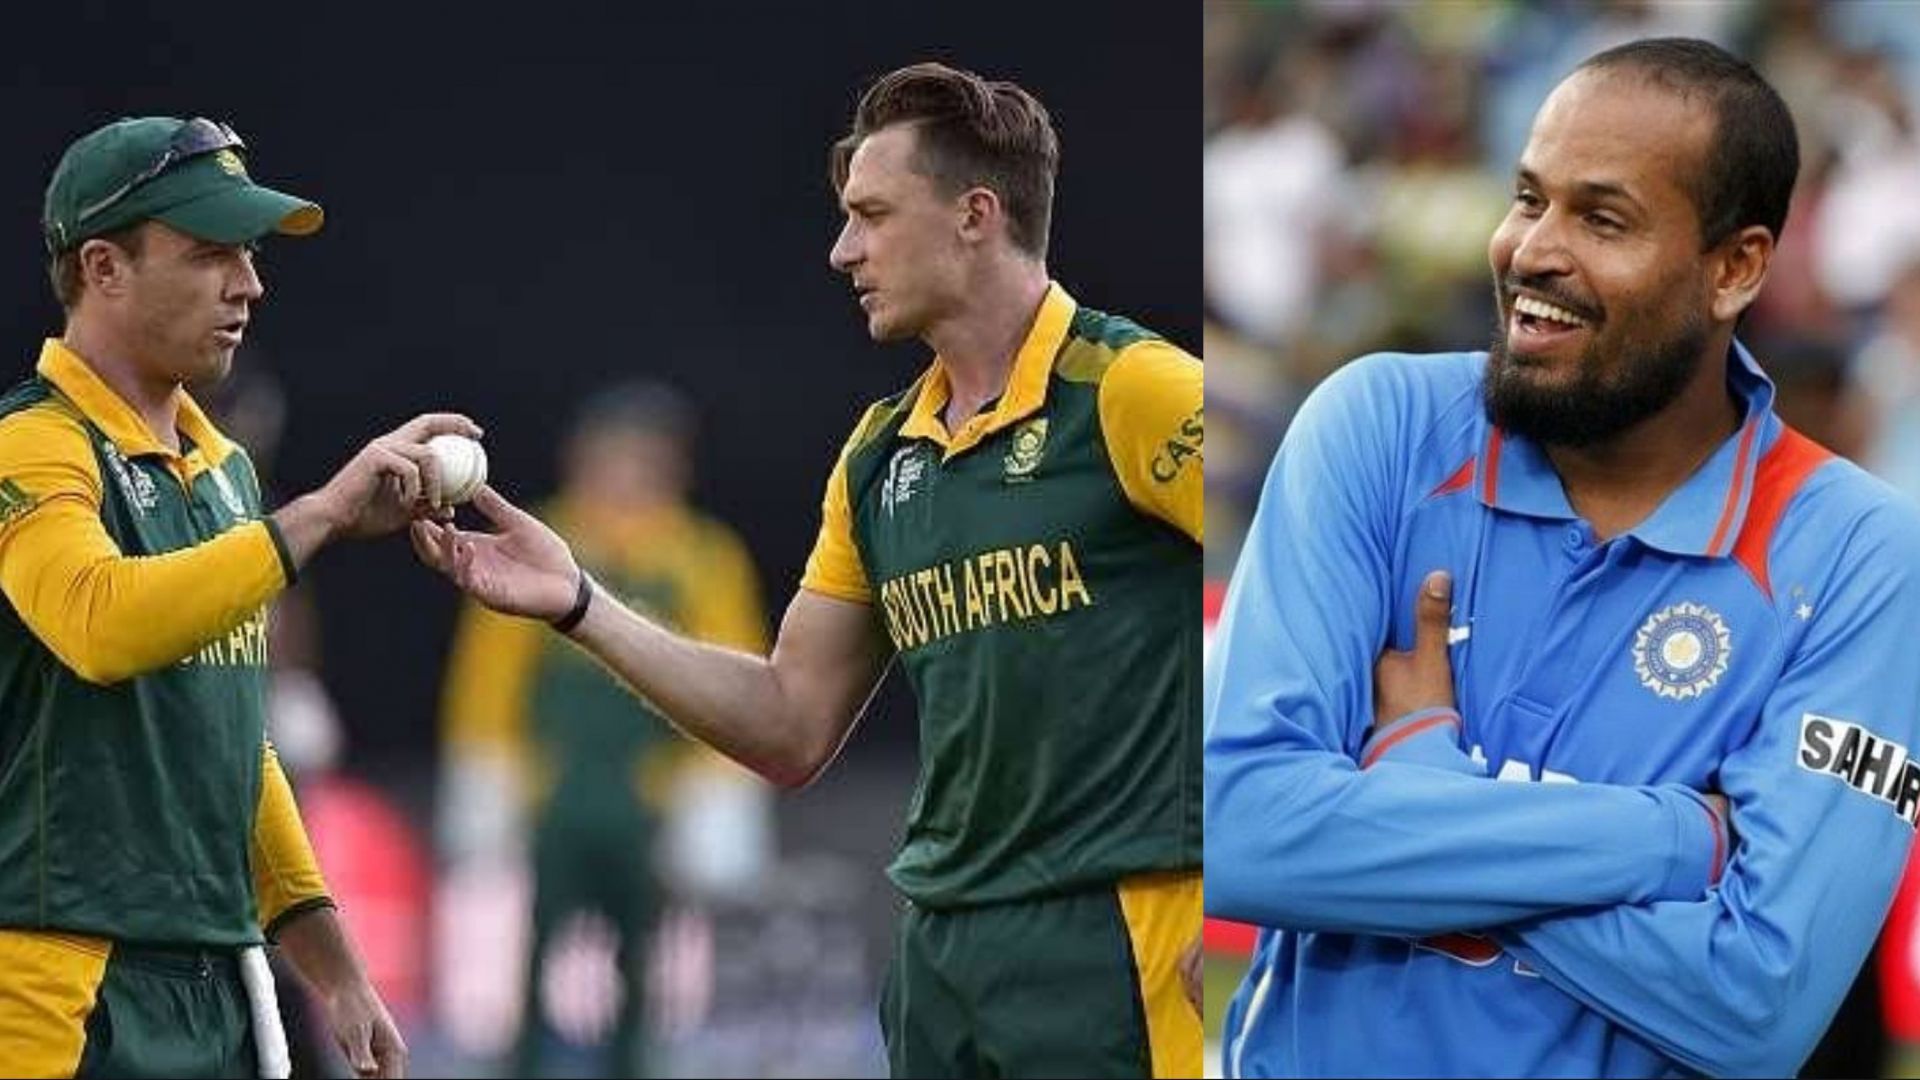 Star cricketers like AB de Villiers, Dale Steyn and Yusuf Pathan called it a day on their careers in 2021